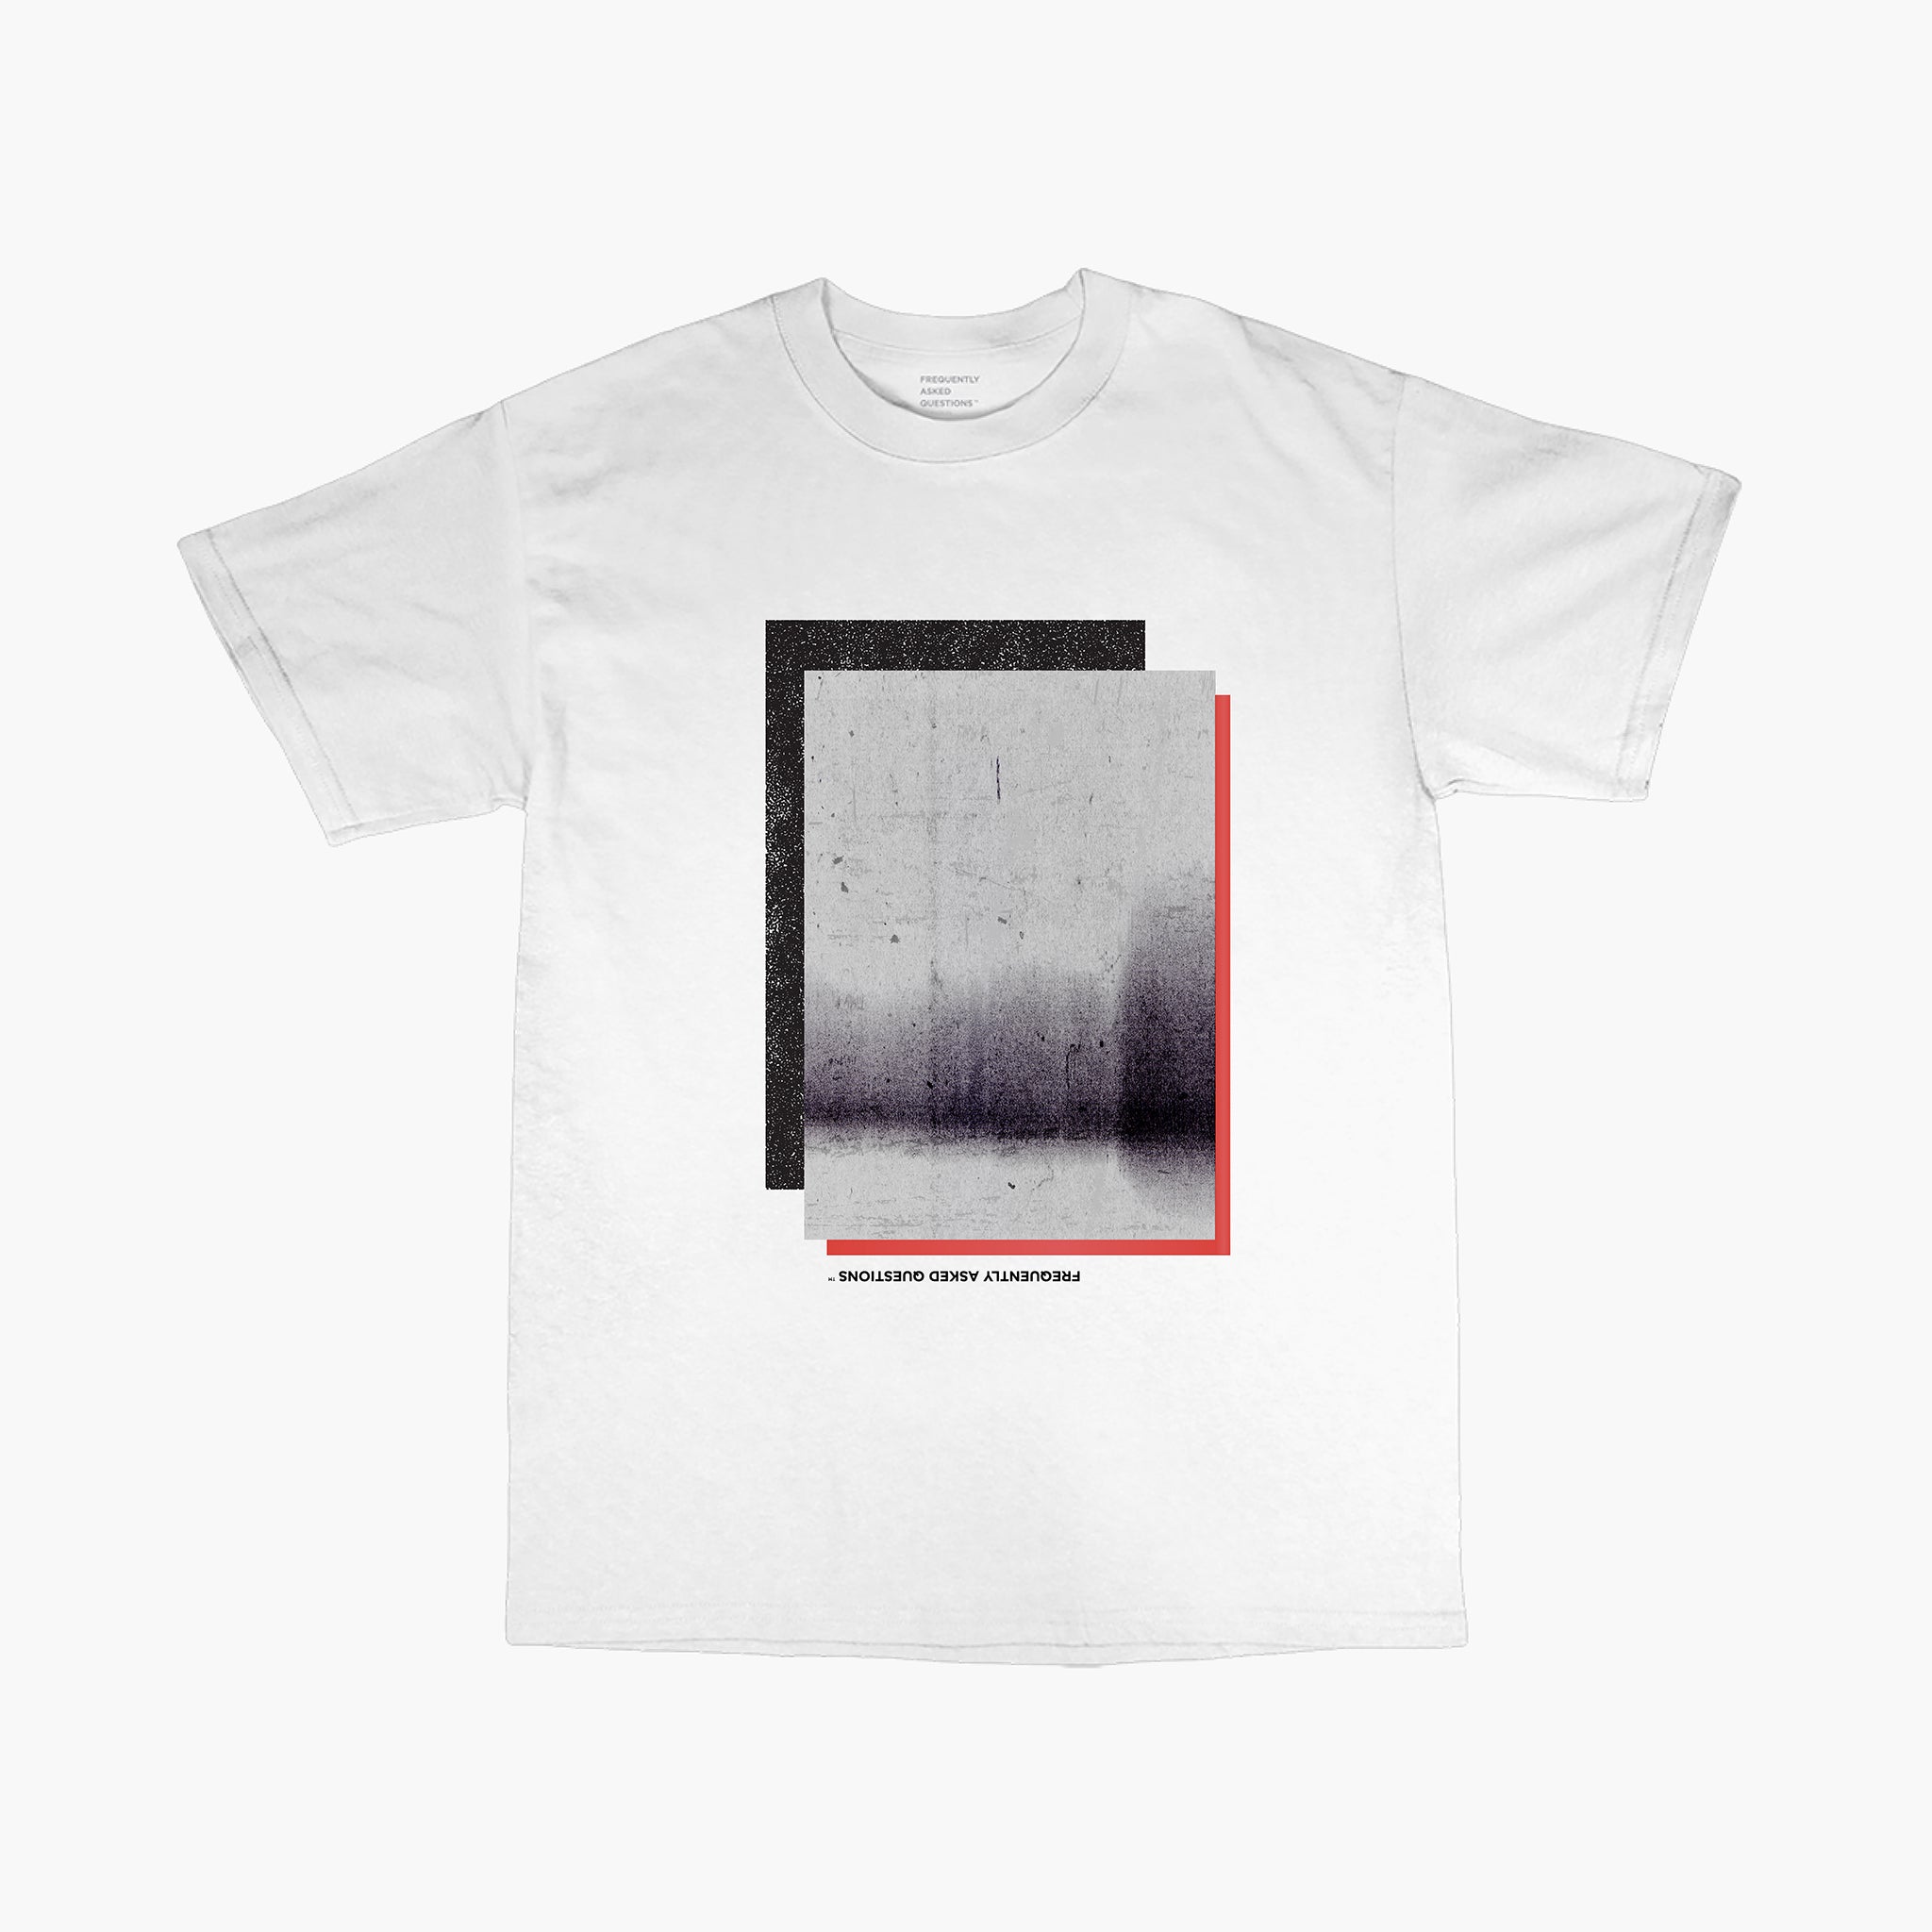 Photocopy T-Shirt - Frequently Asked Questions